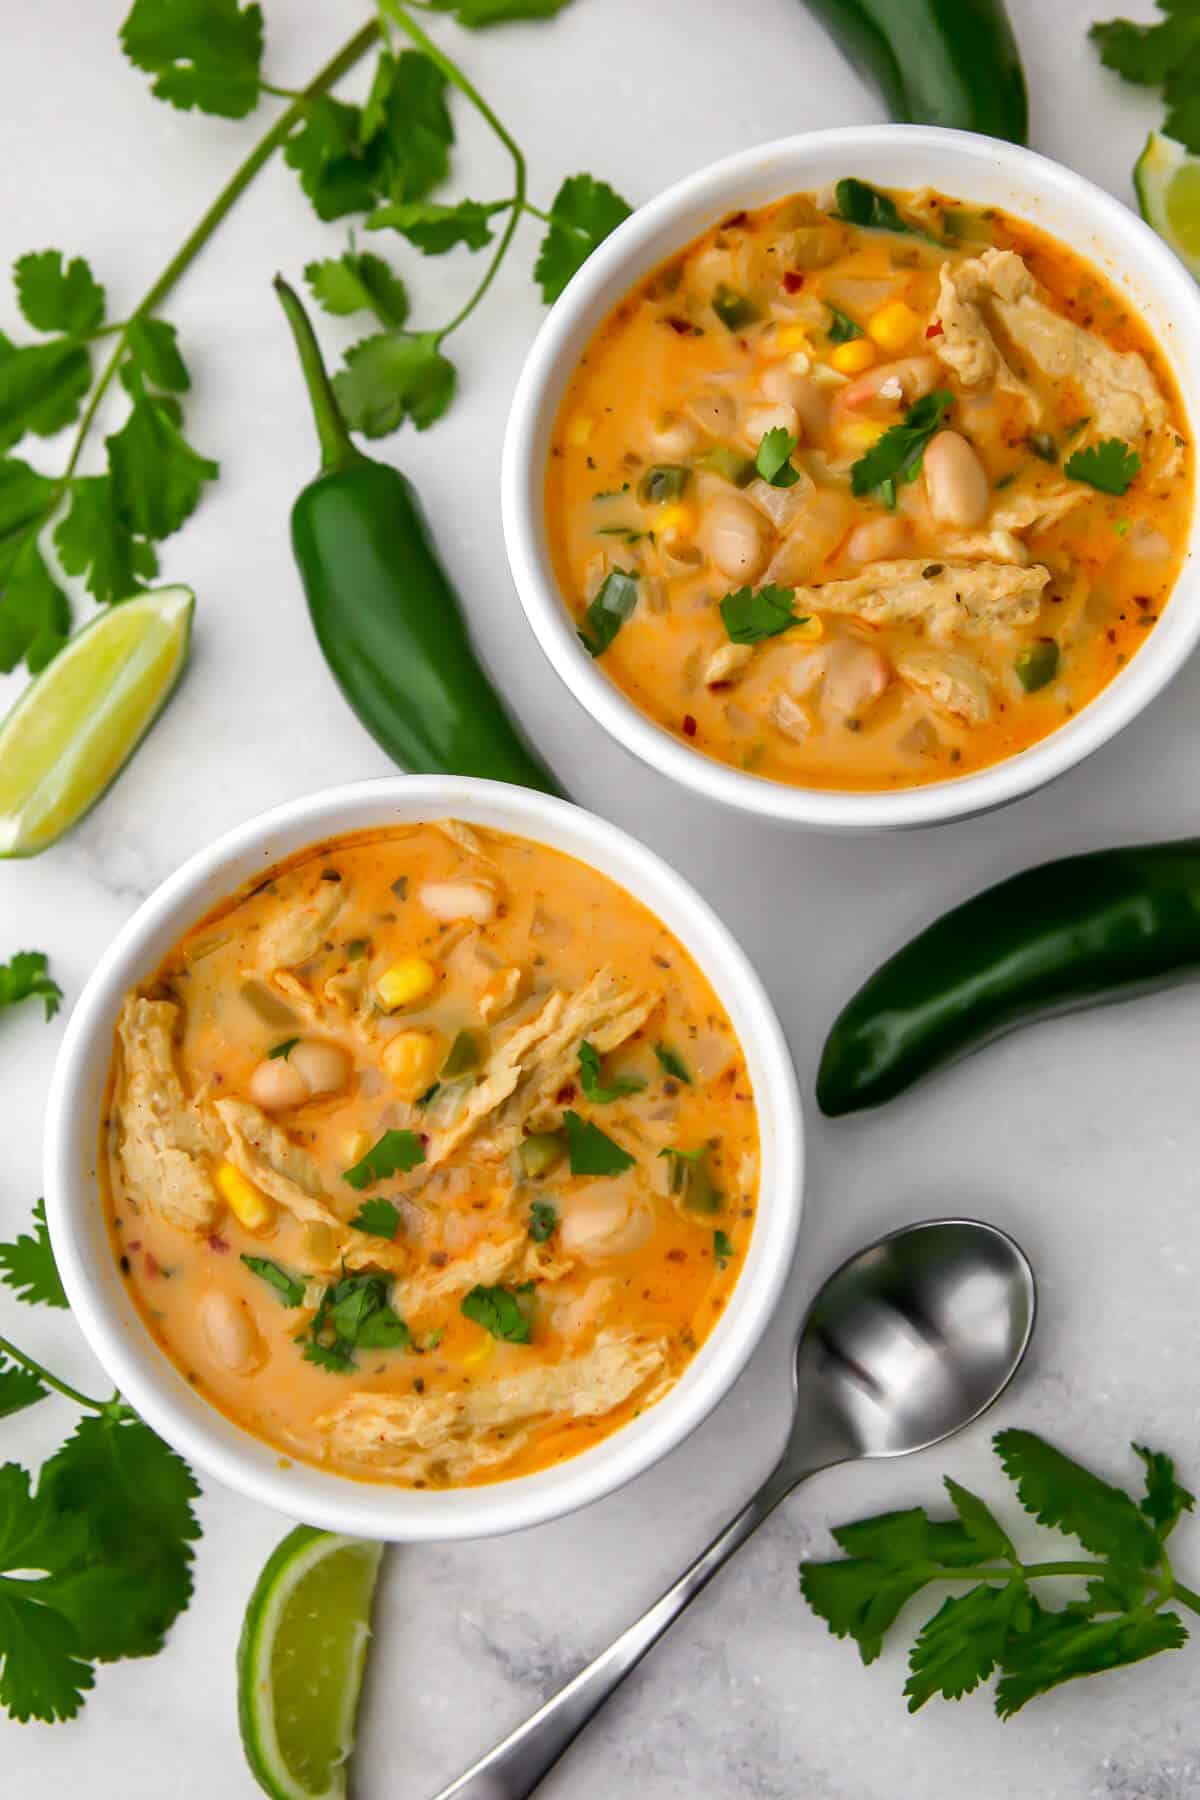 Two bowls of vegan white chili with vegan chicken with jalapeno, lime wedges, and cilantro.